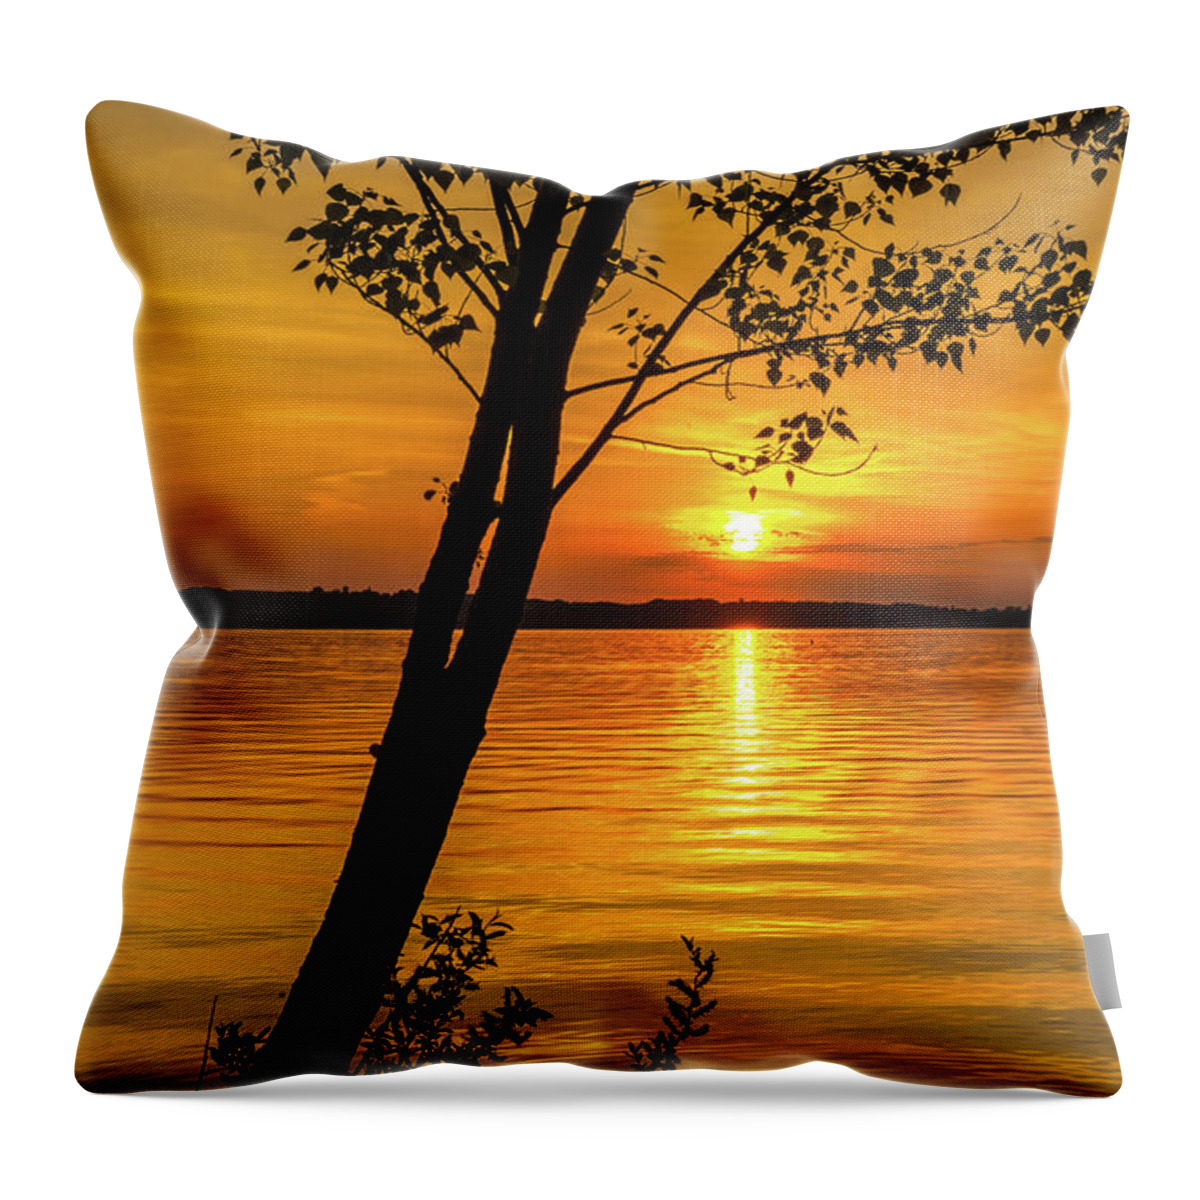 Traverse Bay Sunset Throw Pillow featuring the photograph Traverse Bay Sunset by Dan Sproul